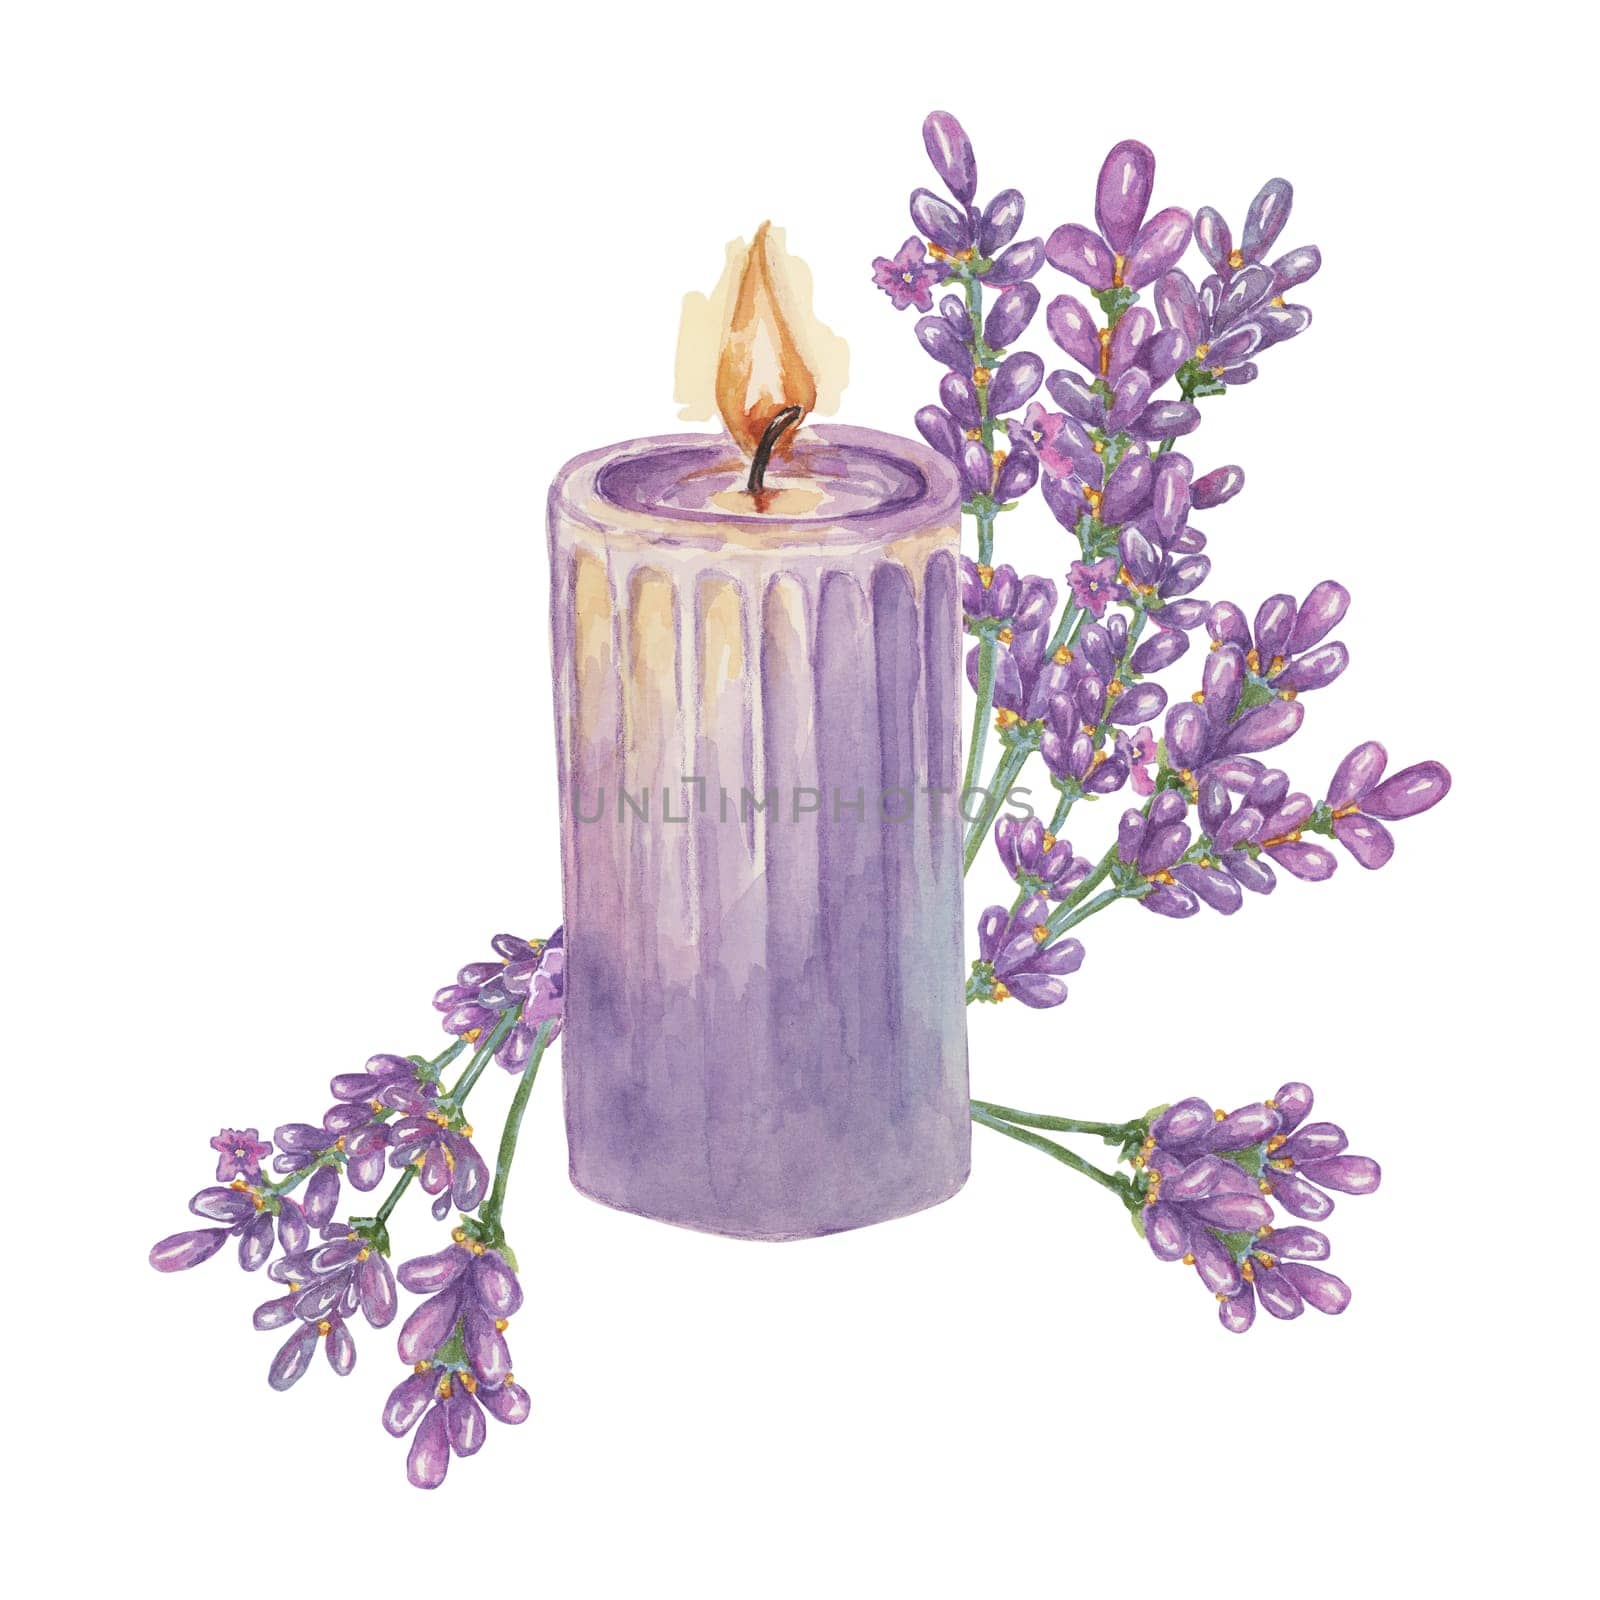 Lavender wax candle for home fragrance. Home spa aromatherapy watercolor illustration. Hand drawn clipart for beauty, cosmetics, wellness products by Fofito